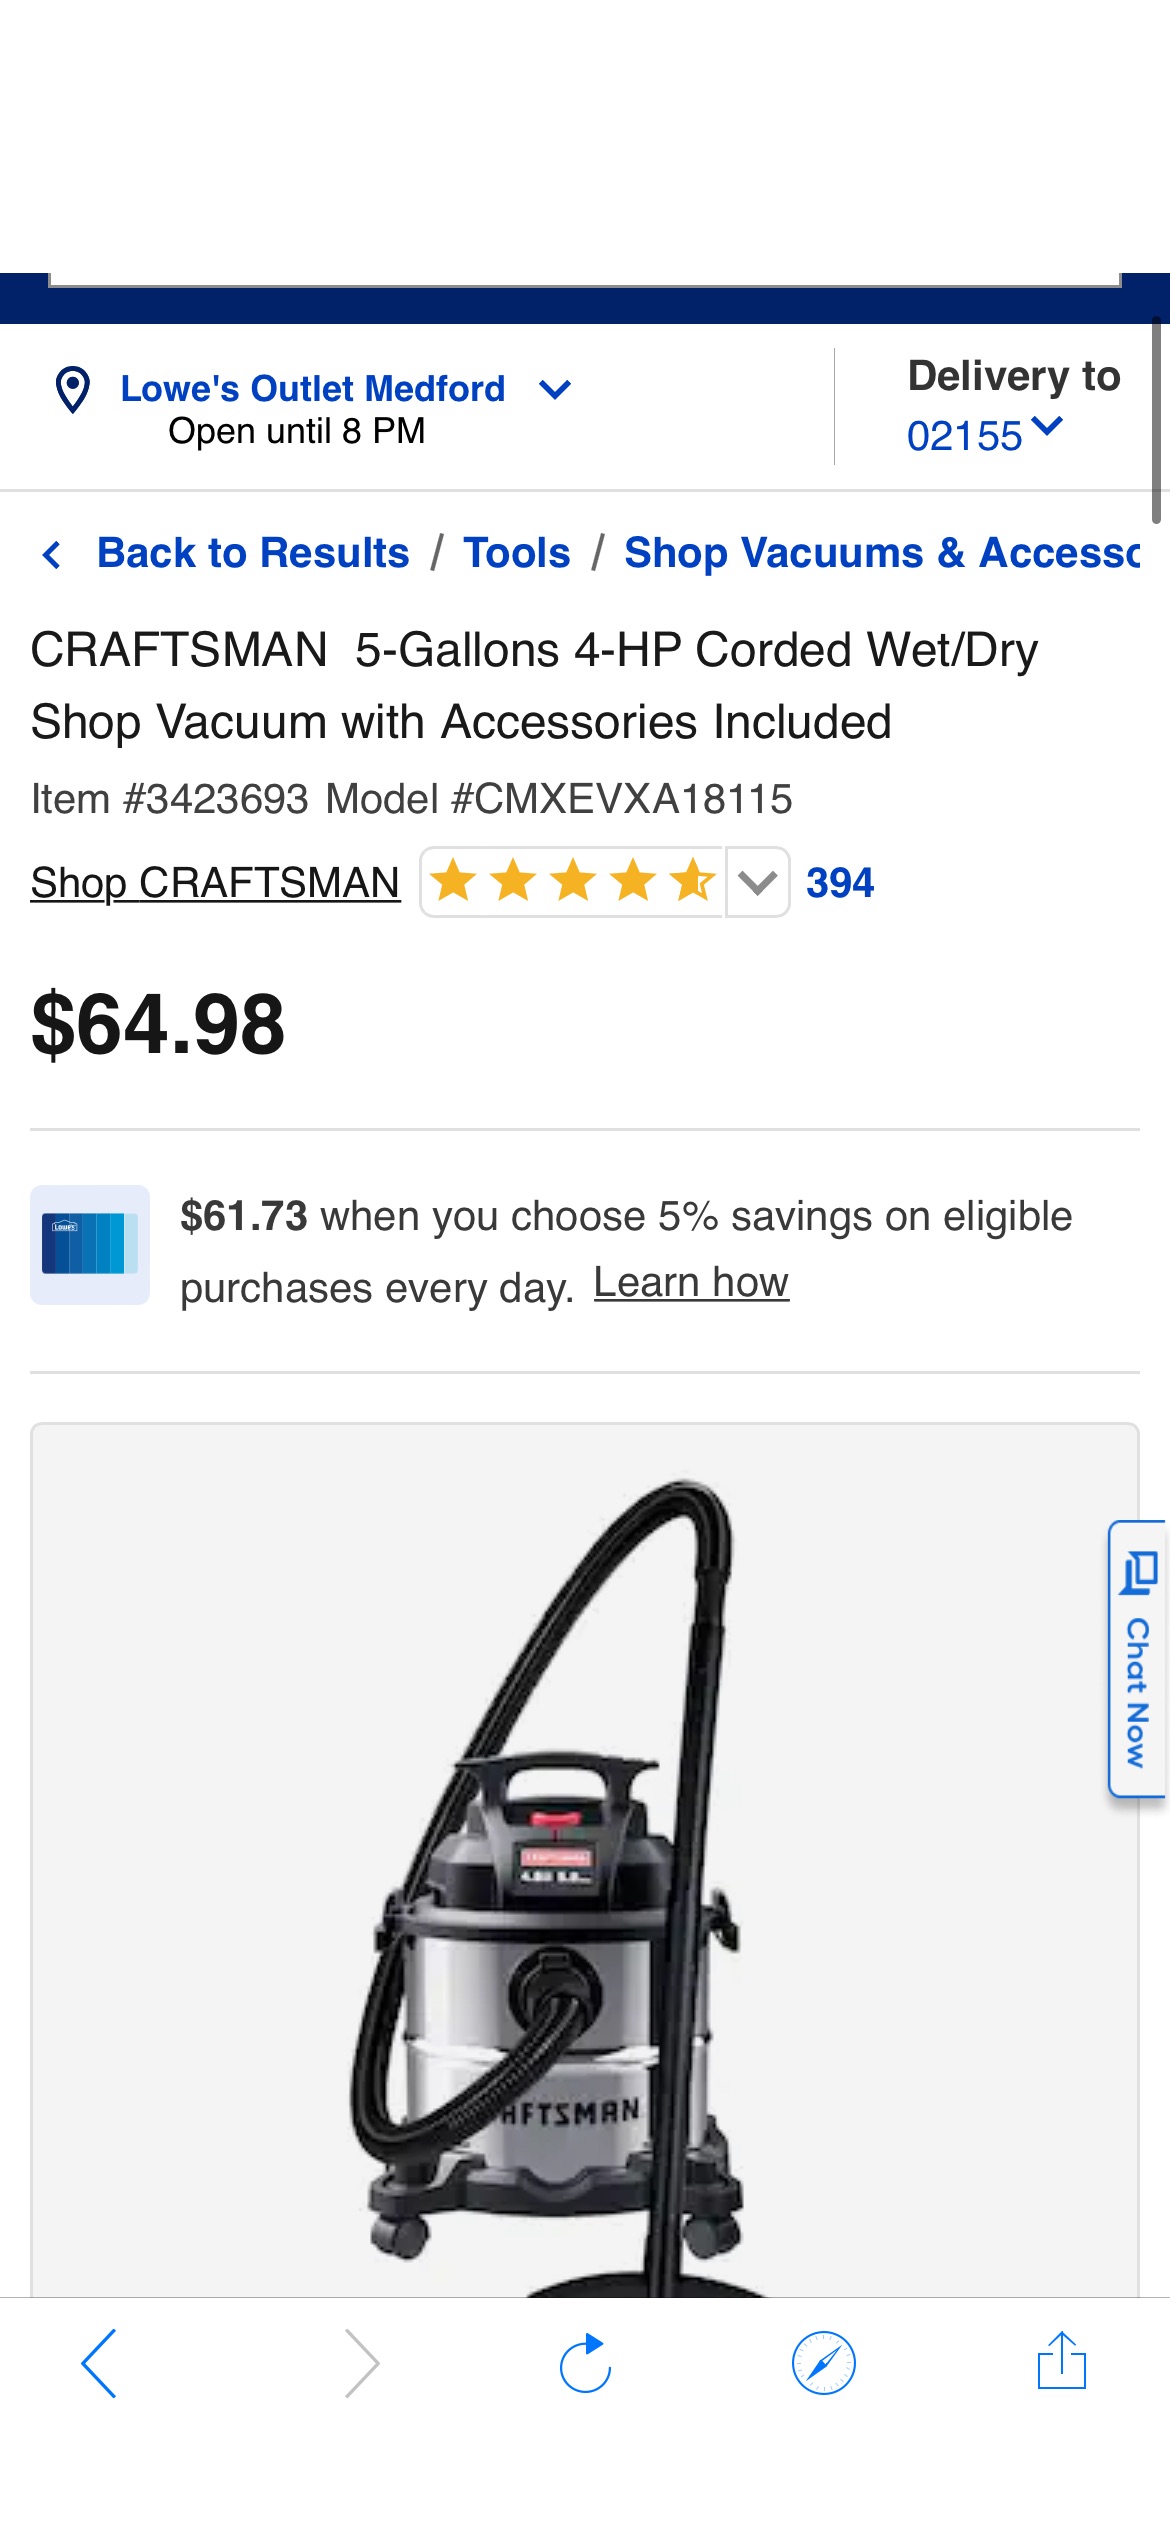 CRAFTSMAN 5-Gallons 4-HP Corded Wet/Dry Shop Vacuum with Accessories Included in the Shop Vacuums department at Lowes.com